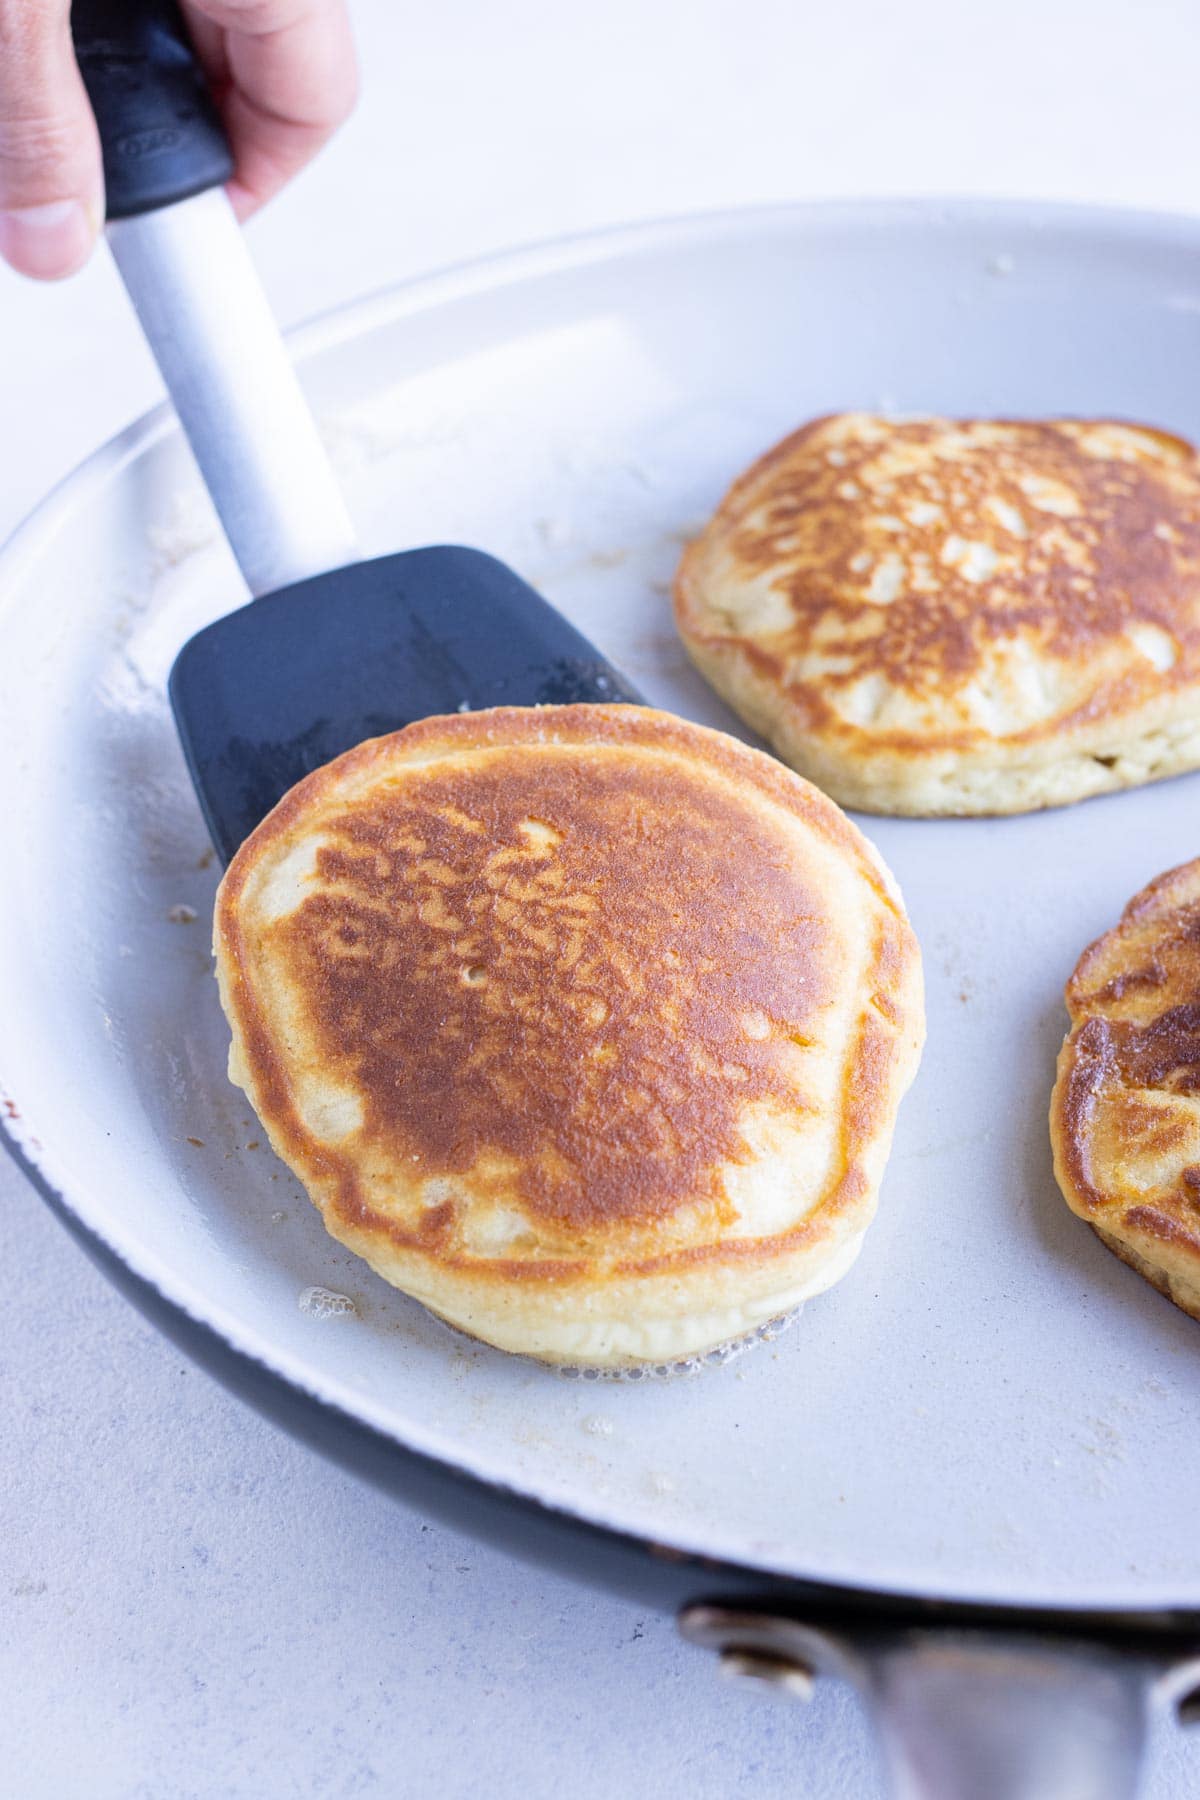 Pancakes are flipped with a spatula.